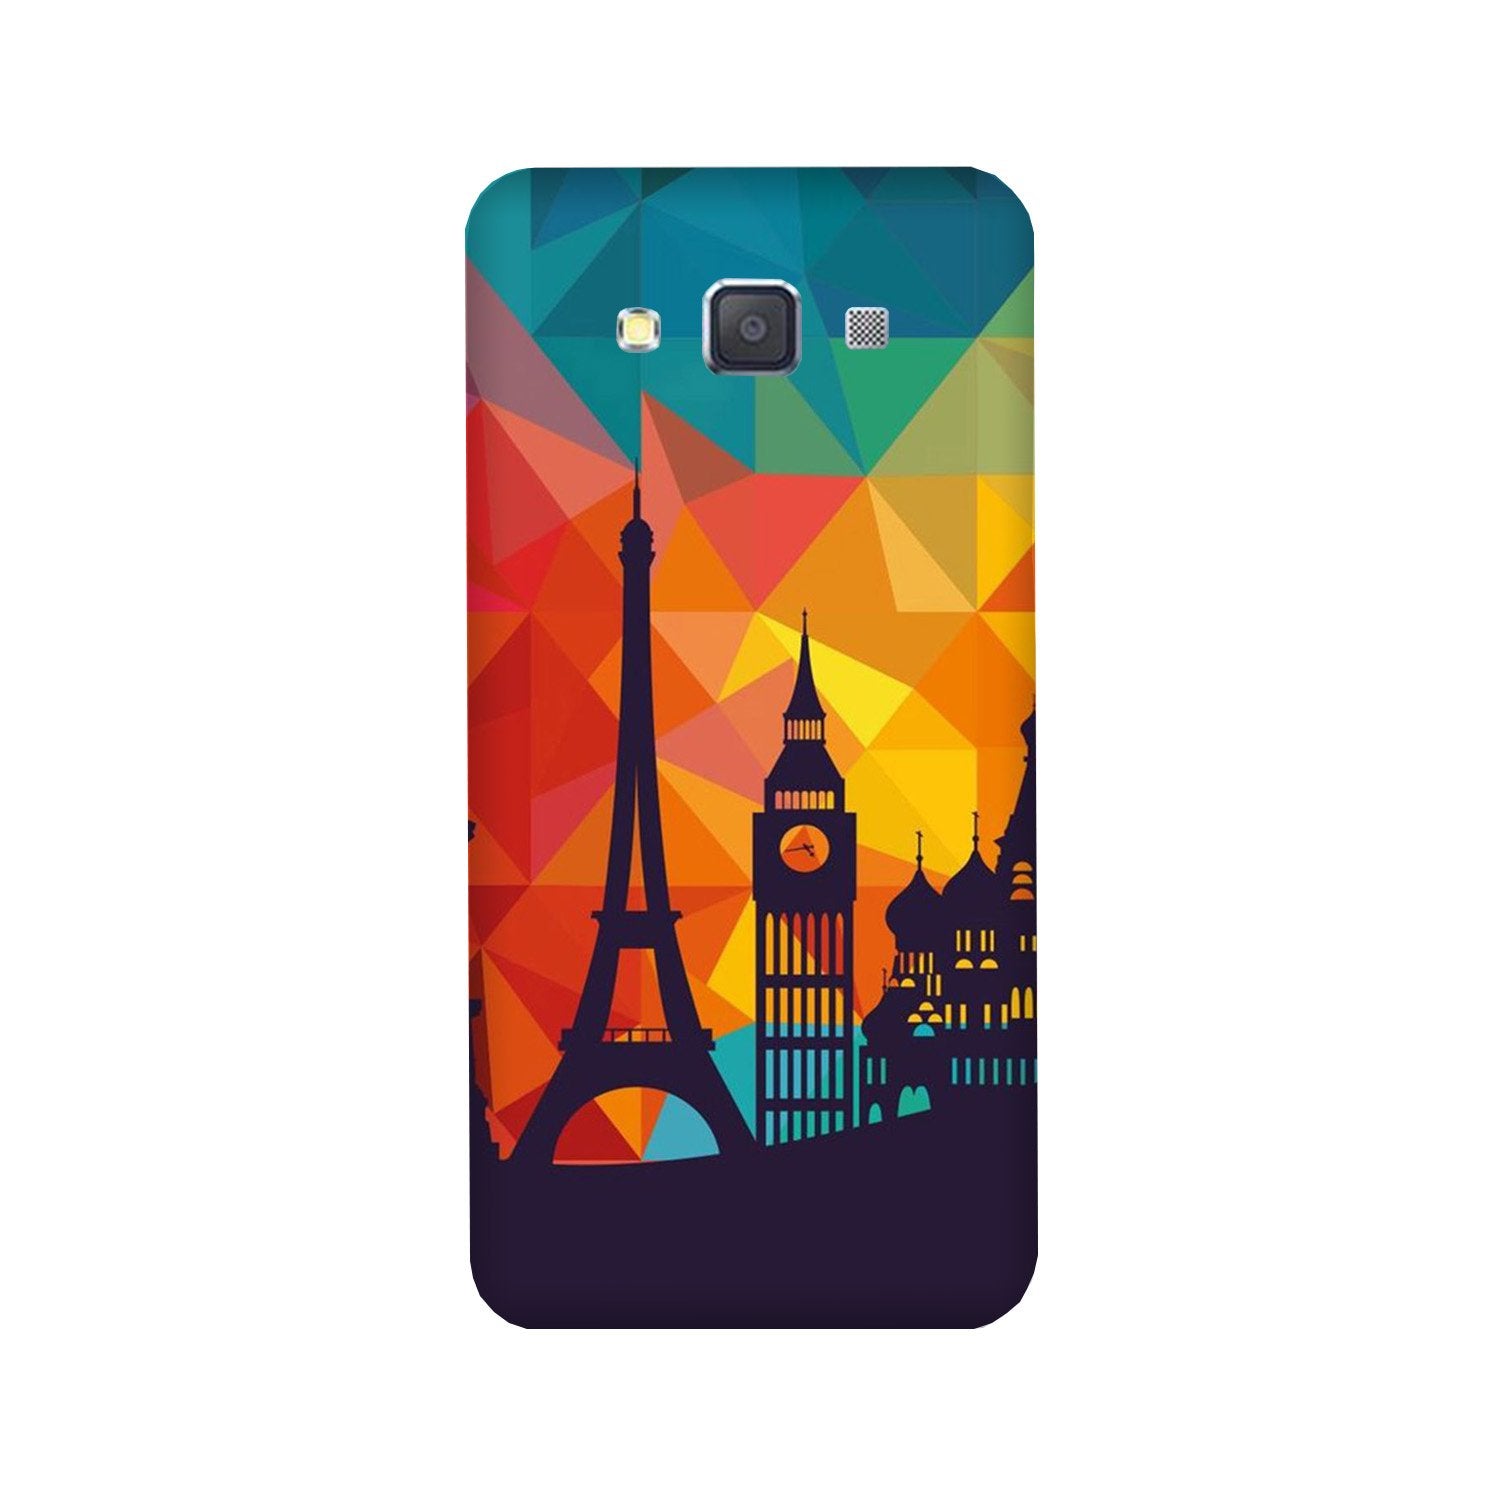 Eiffel Tower2 Case for Galaxy Grand Prime